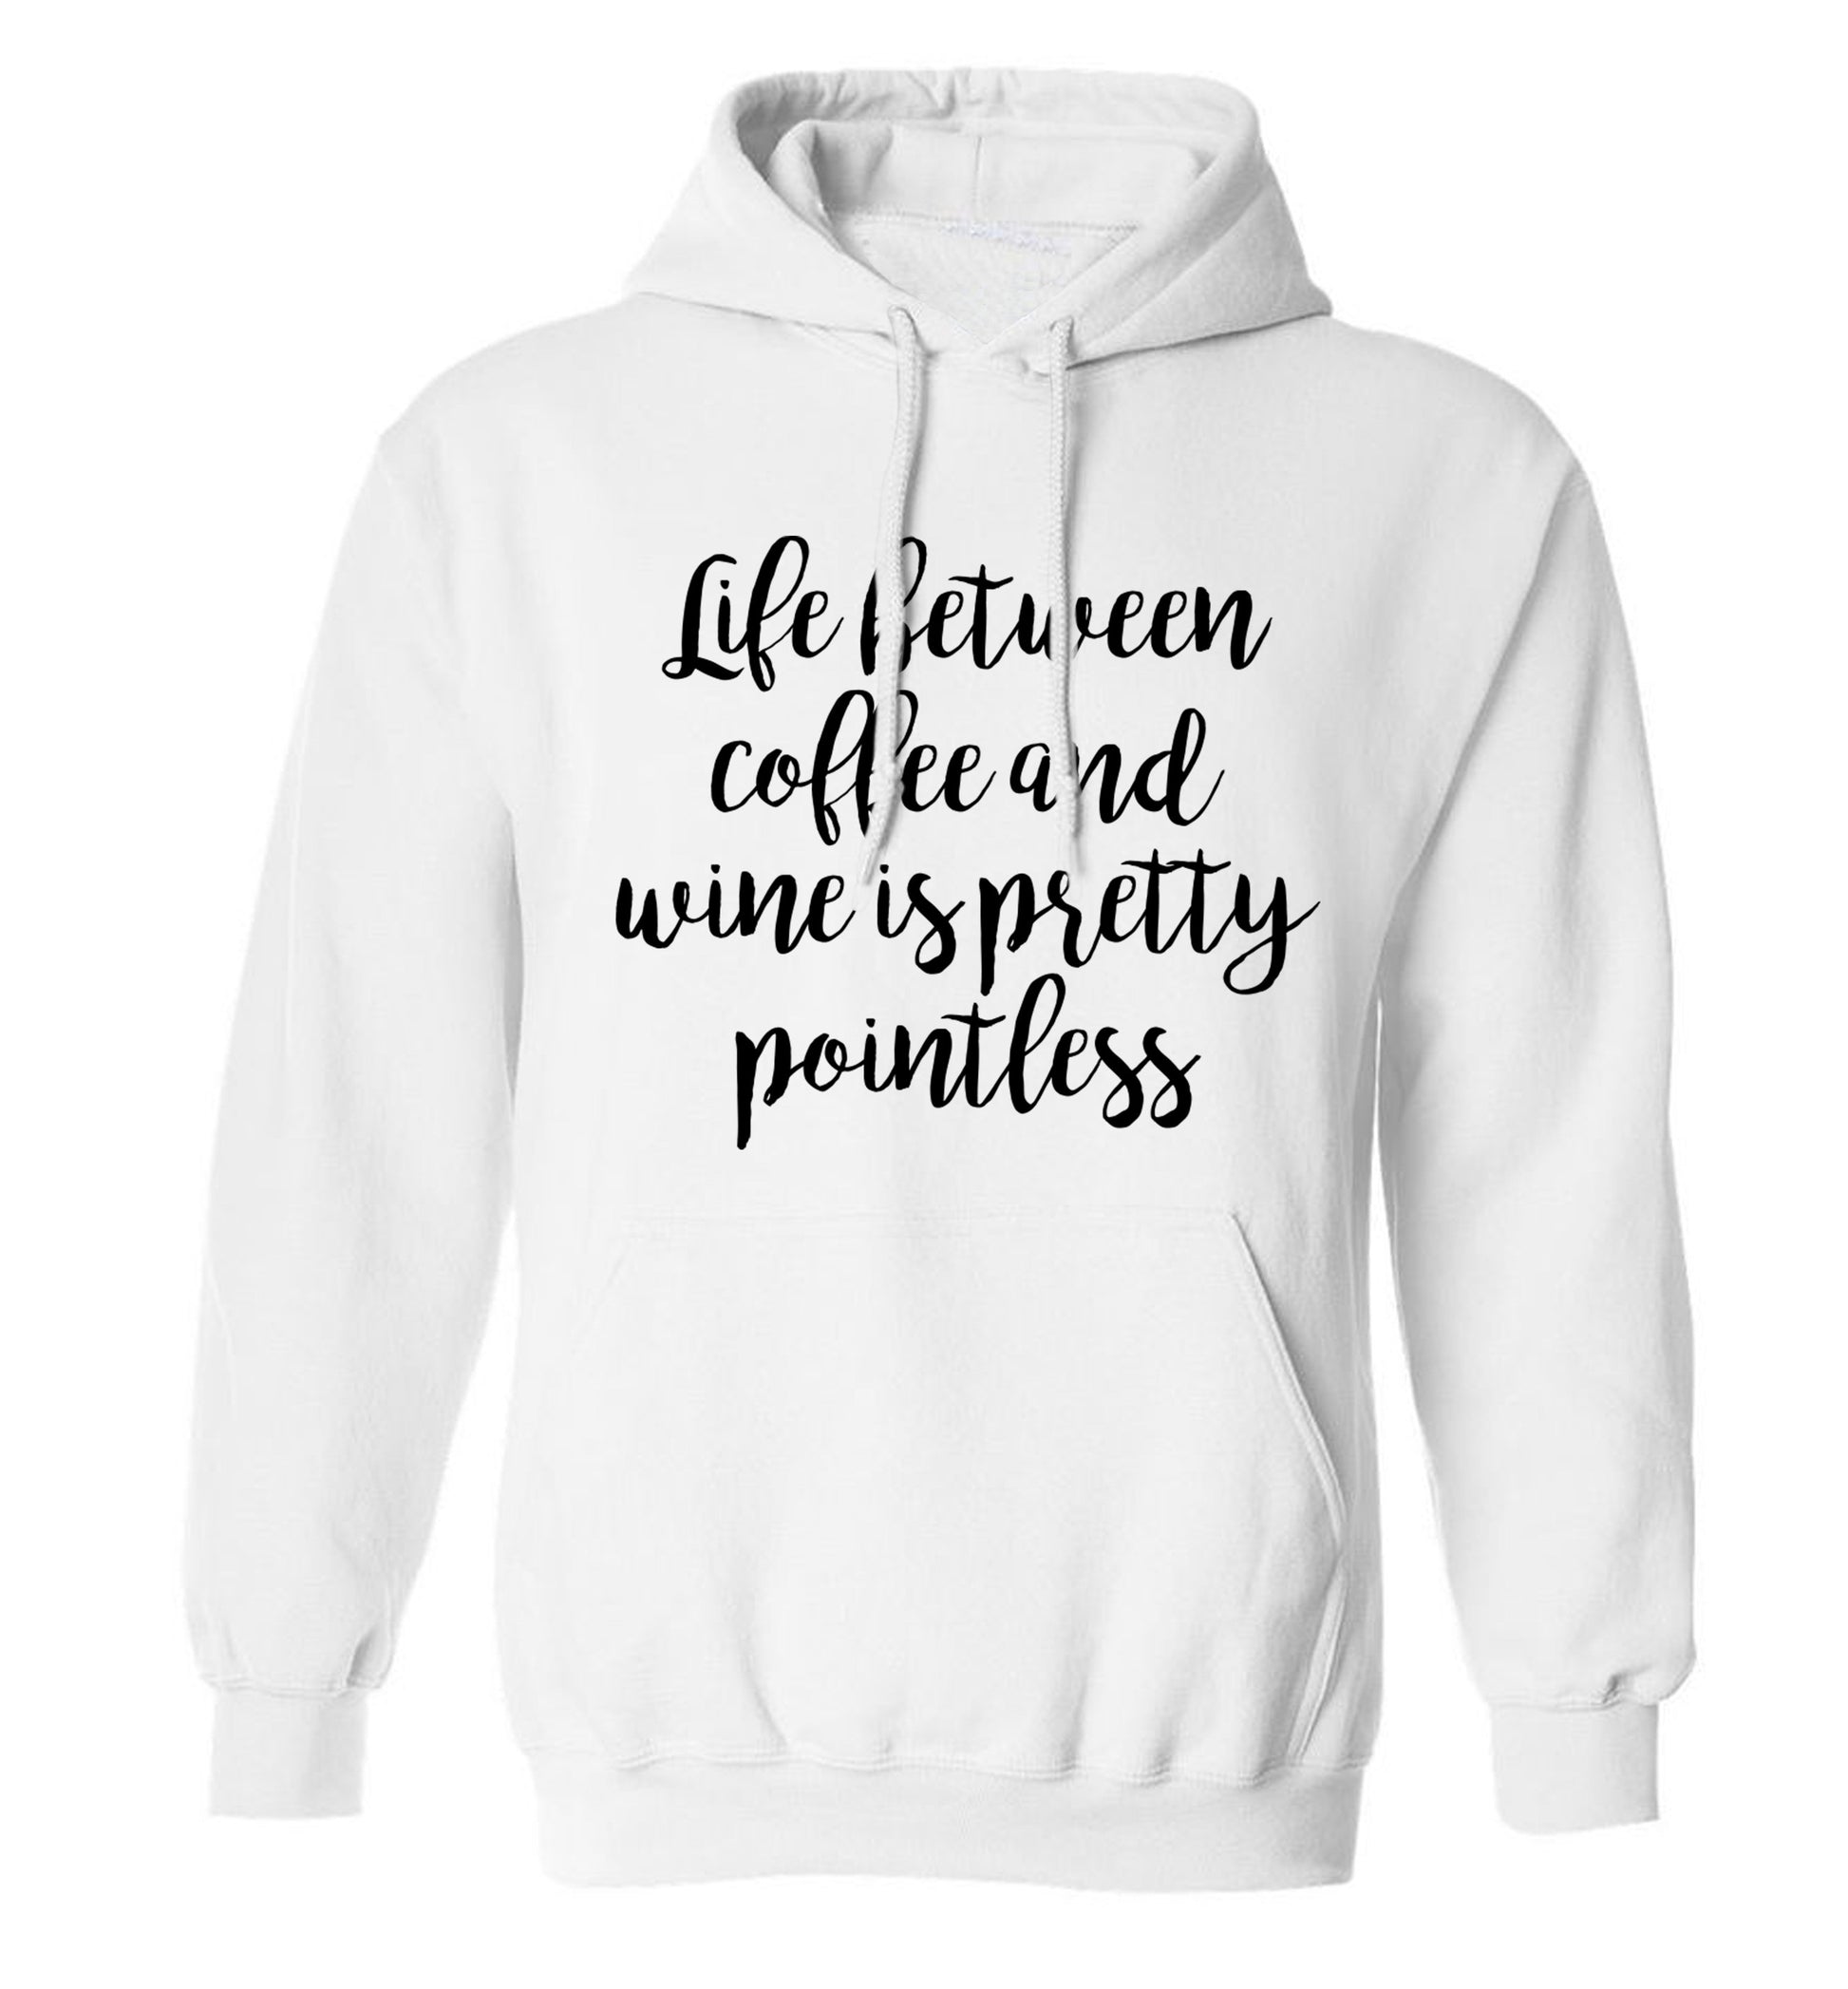 Life between coffee and wine is pretty pointless adults unisex white hoodie 2XL